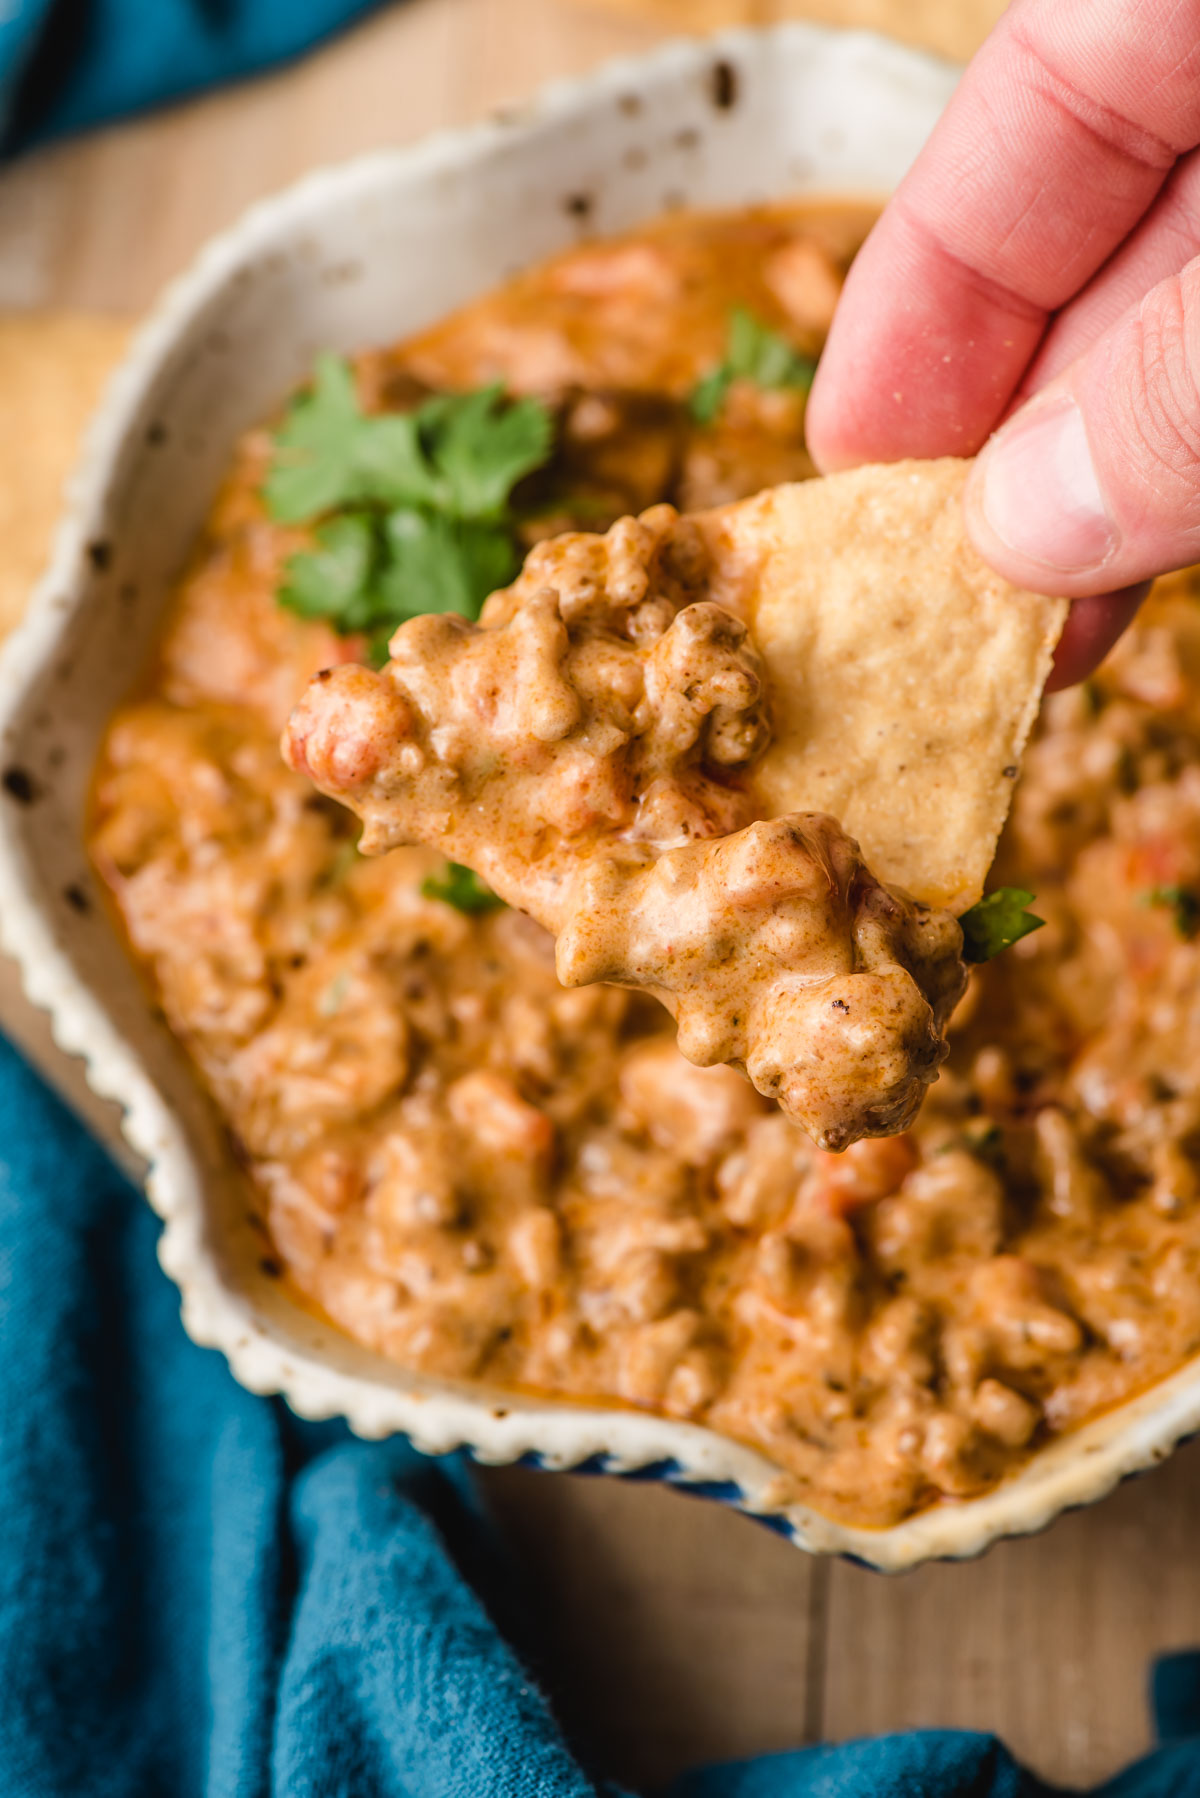 A hand dips a tortilla chip into a bowl of queso dip with meat.